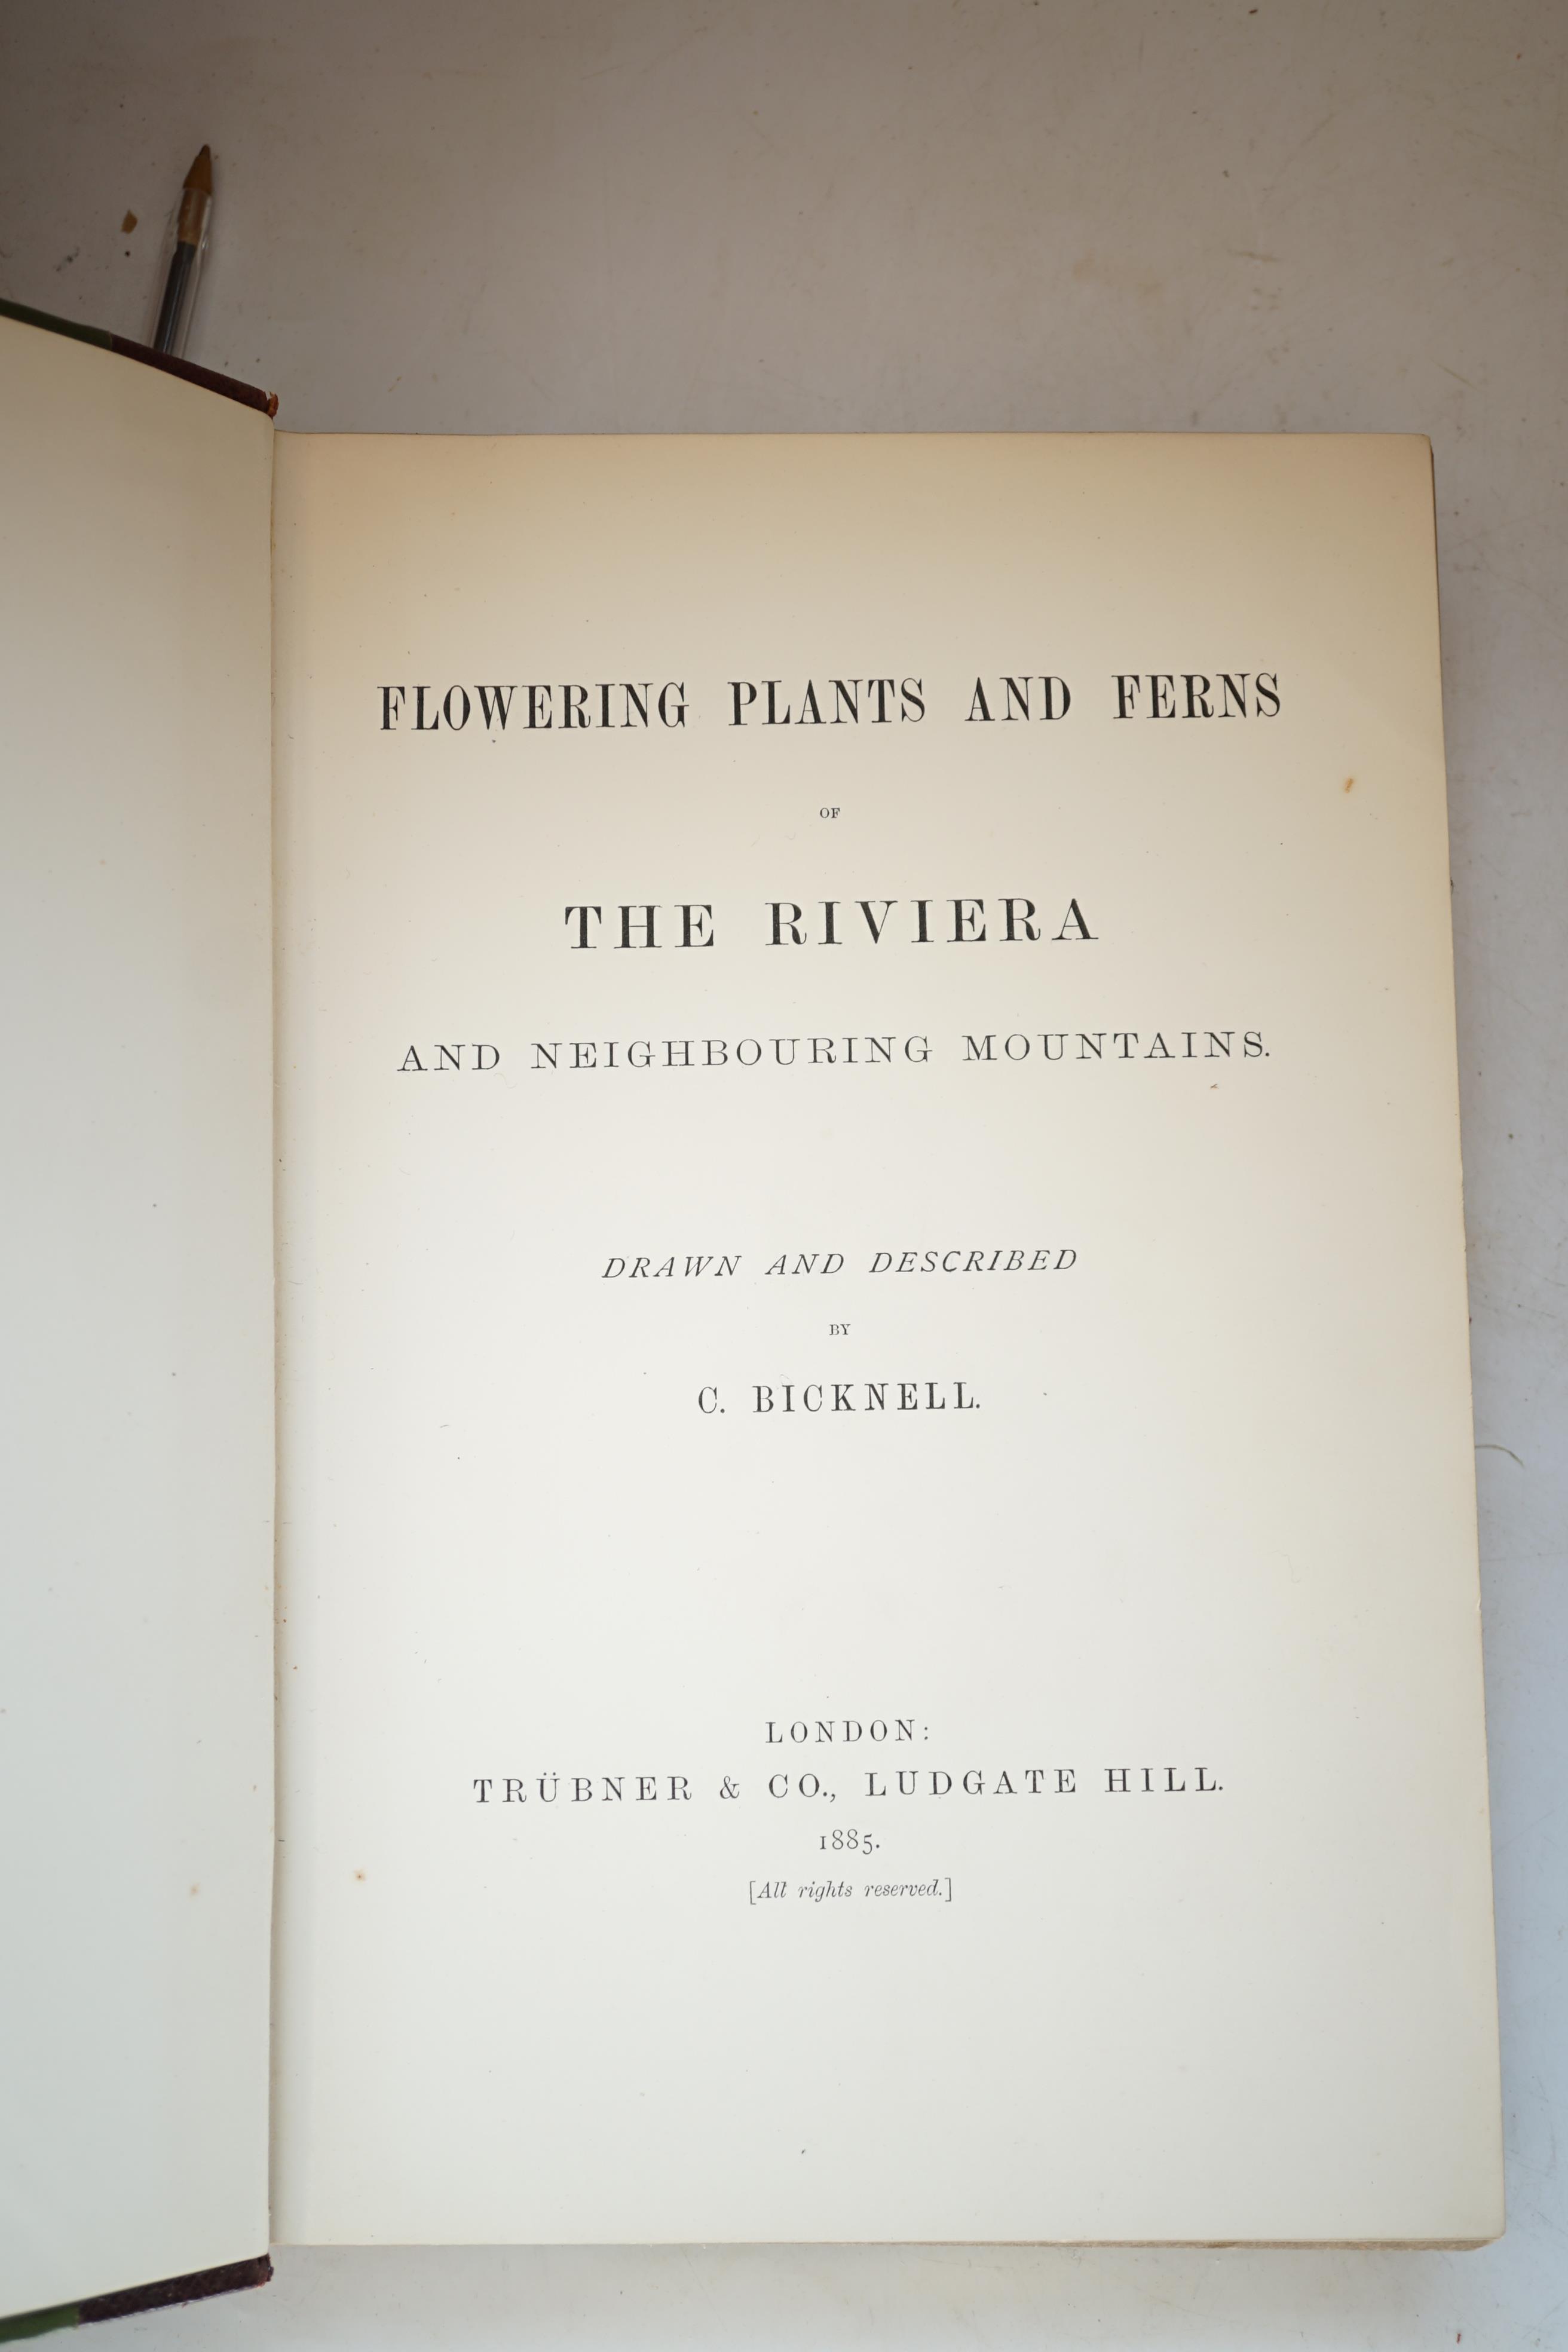 Bicknell, Clarence - Flowering Plants & Ferns of the Riviera & Neighbouring Mountains, 4to, quarter maroon morocco, 82 colour plates, Trubner & Co., London, 1885, together with Moggridge, J. Traherne - Contributions to t